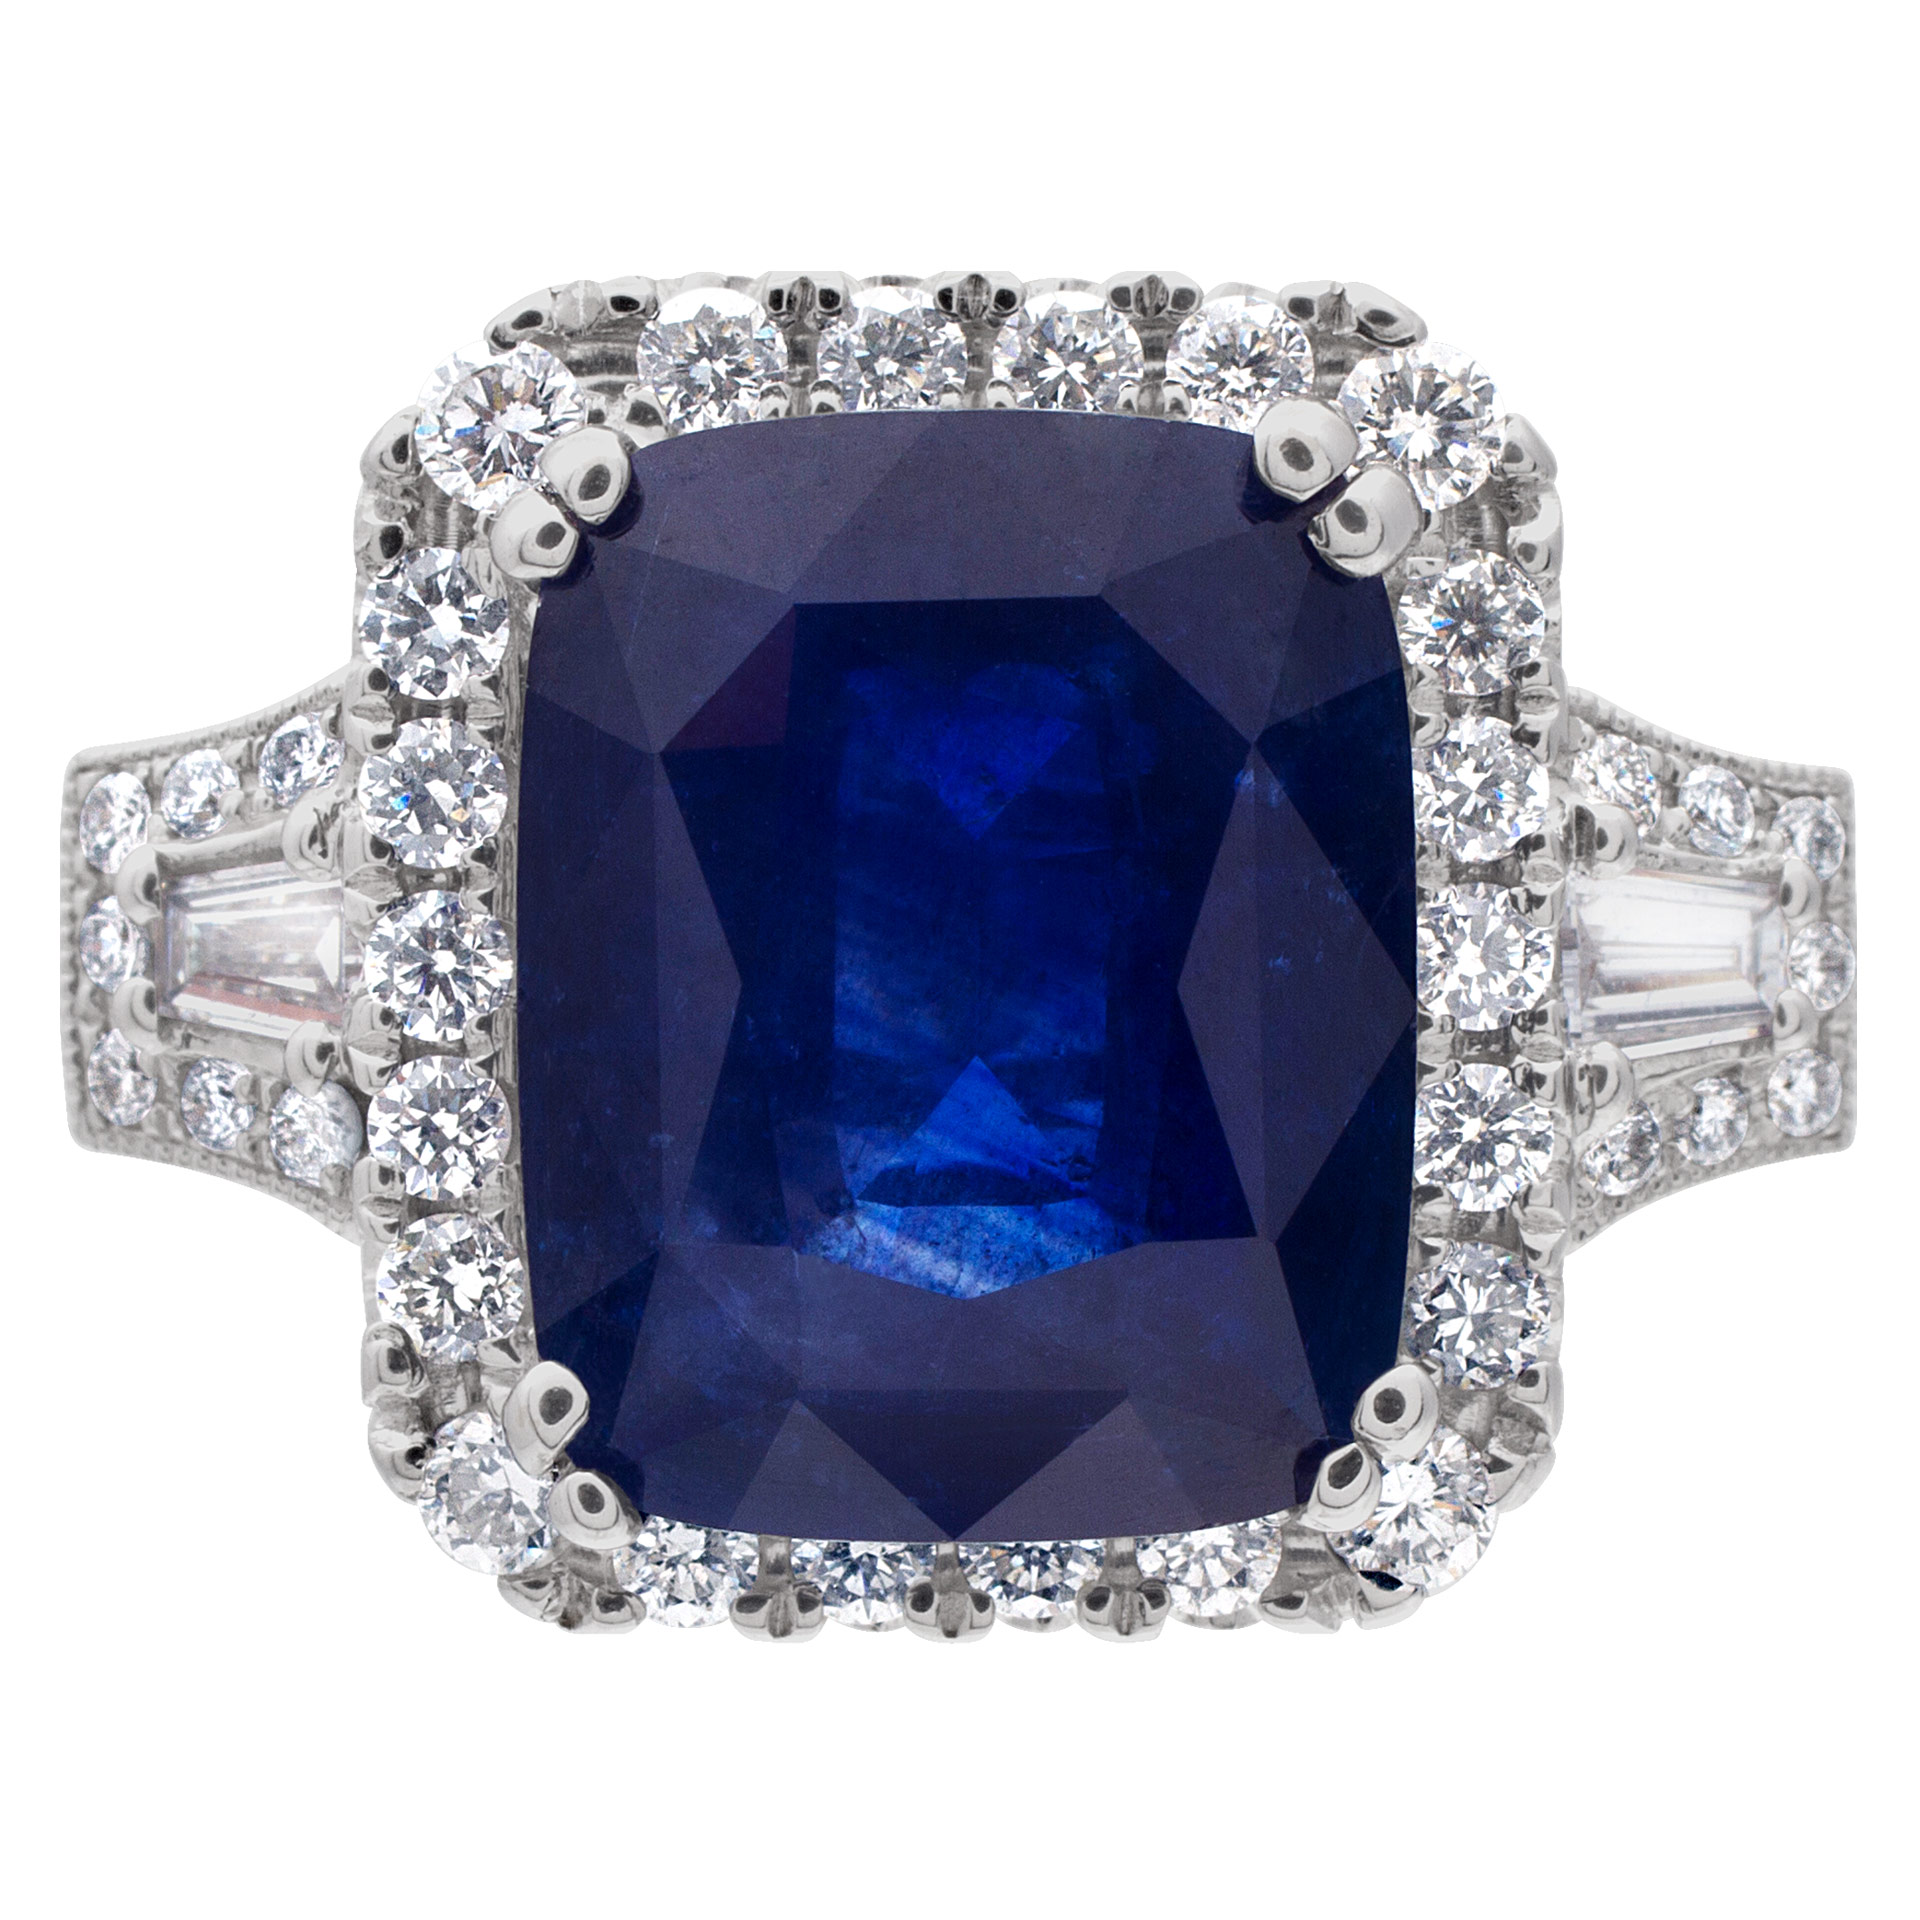 Beautiful 7.26 carats blue sapphire and diamond ring in 18k white gold